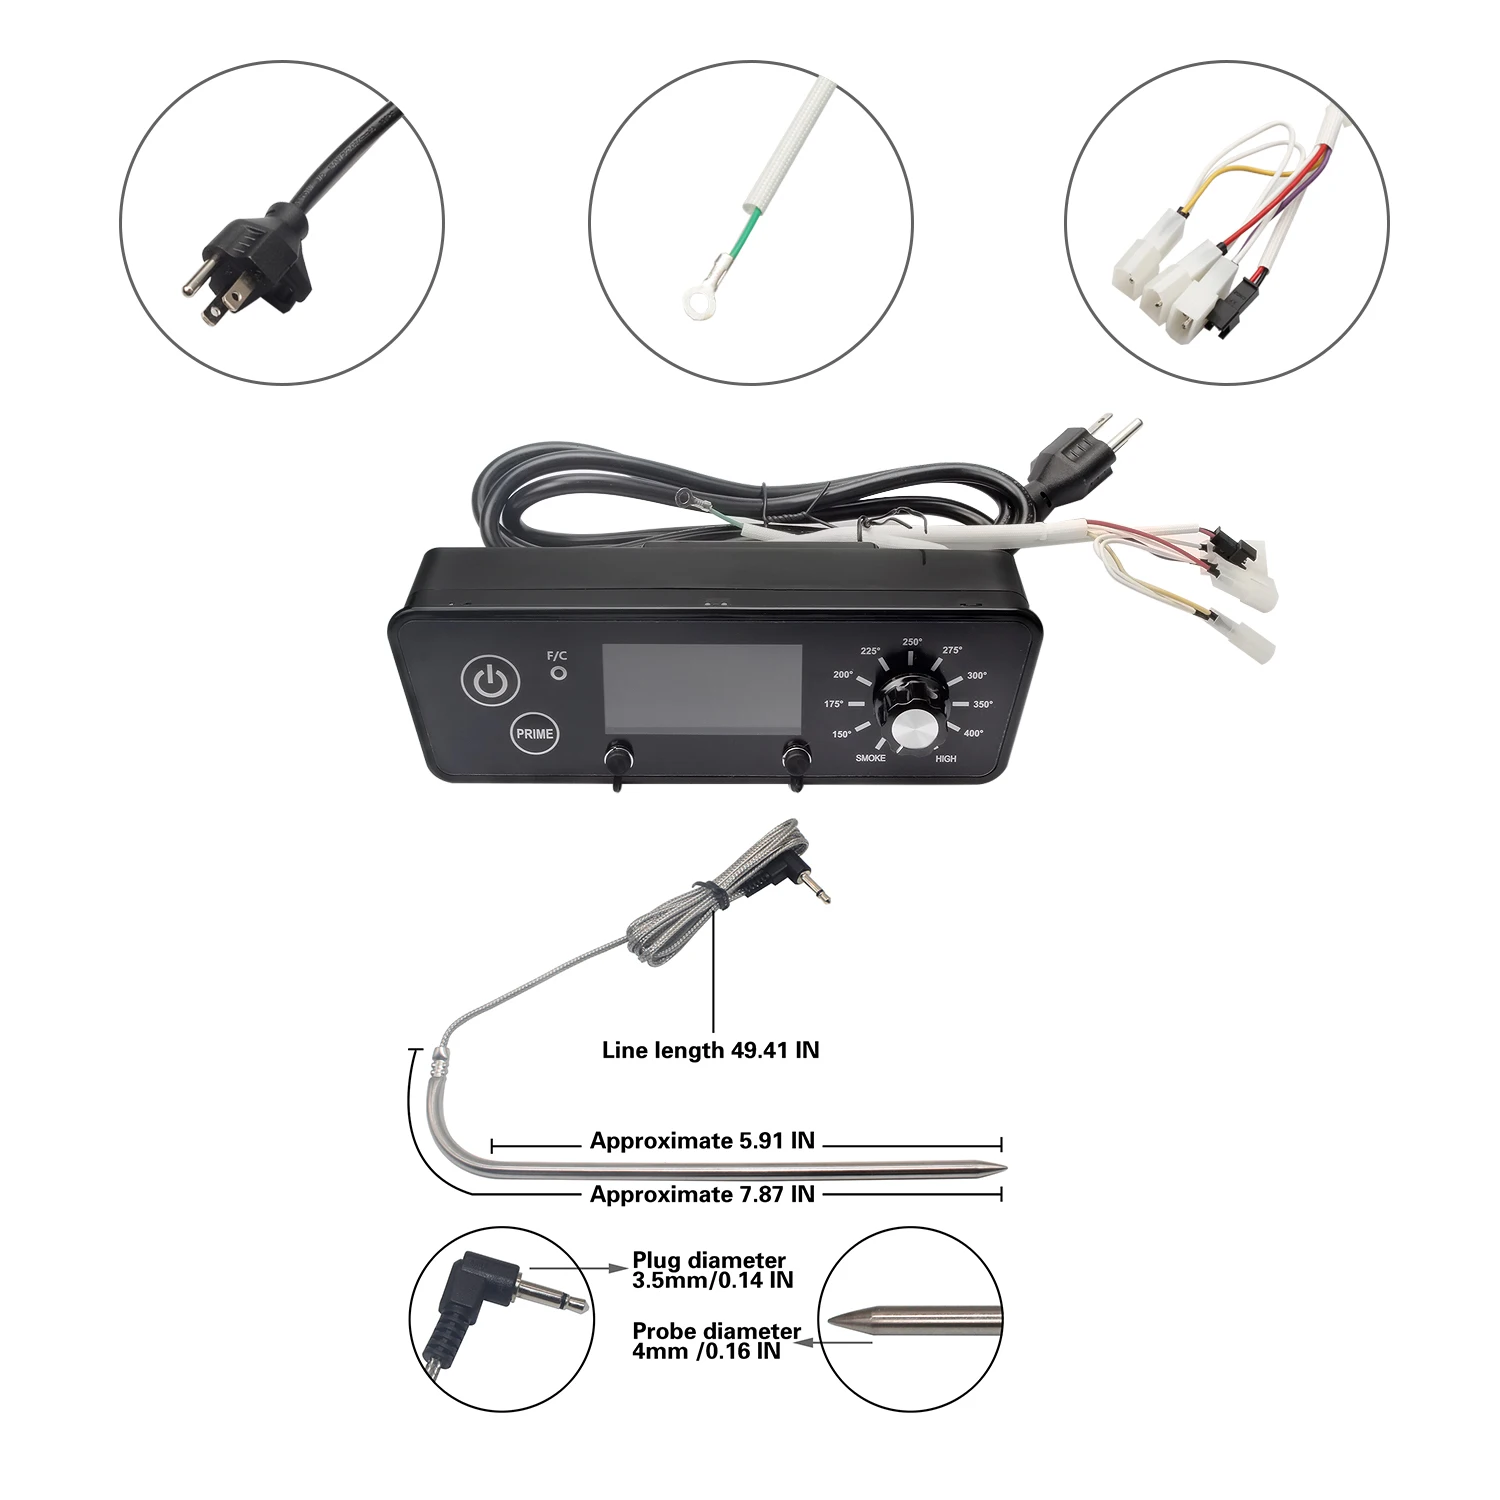 https://ae01.alicdn.com/kf/Sd6dcf30093404a23b2cf2d8973b94cd5J/Digital-Thermostat-Control-Board-LCD-Display-Hot-Rod-Ignitor-Meat-RTD-Temp-Probe-For-Pit-Boss.jpg